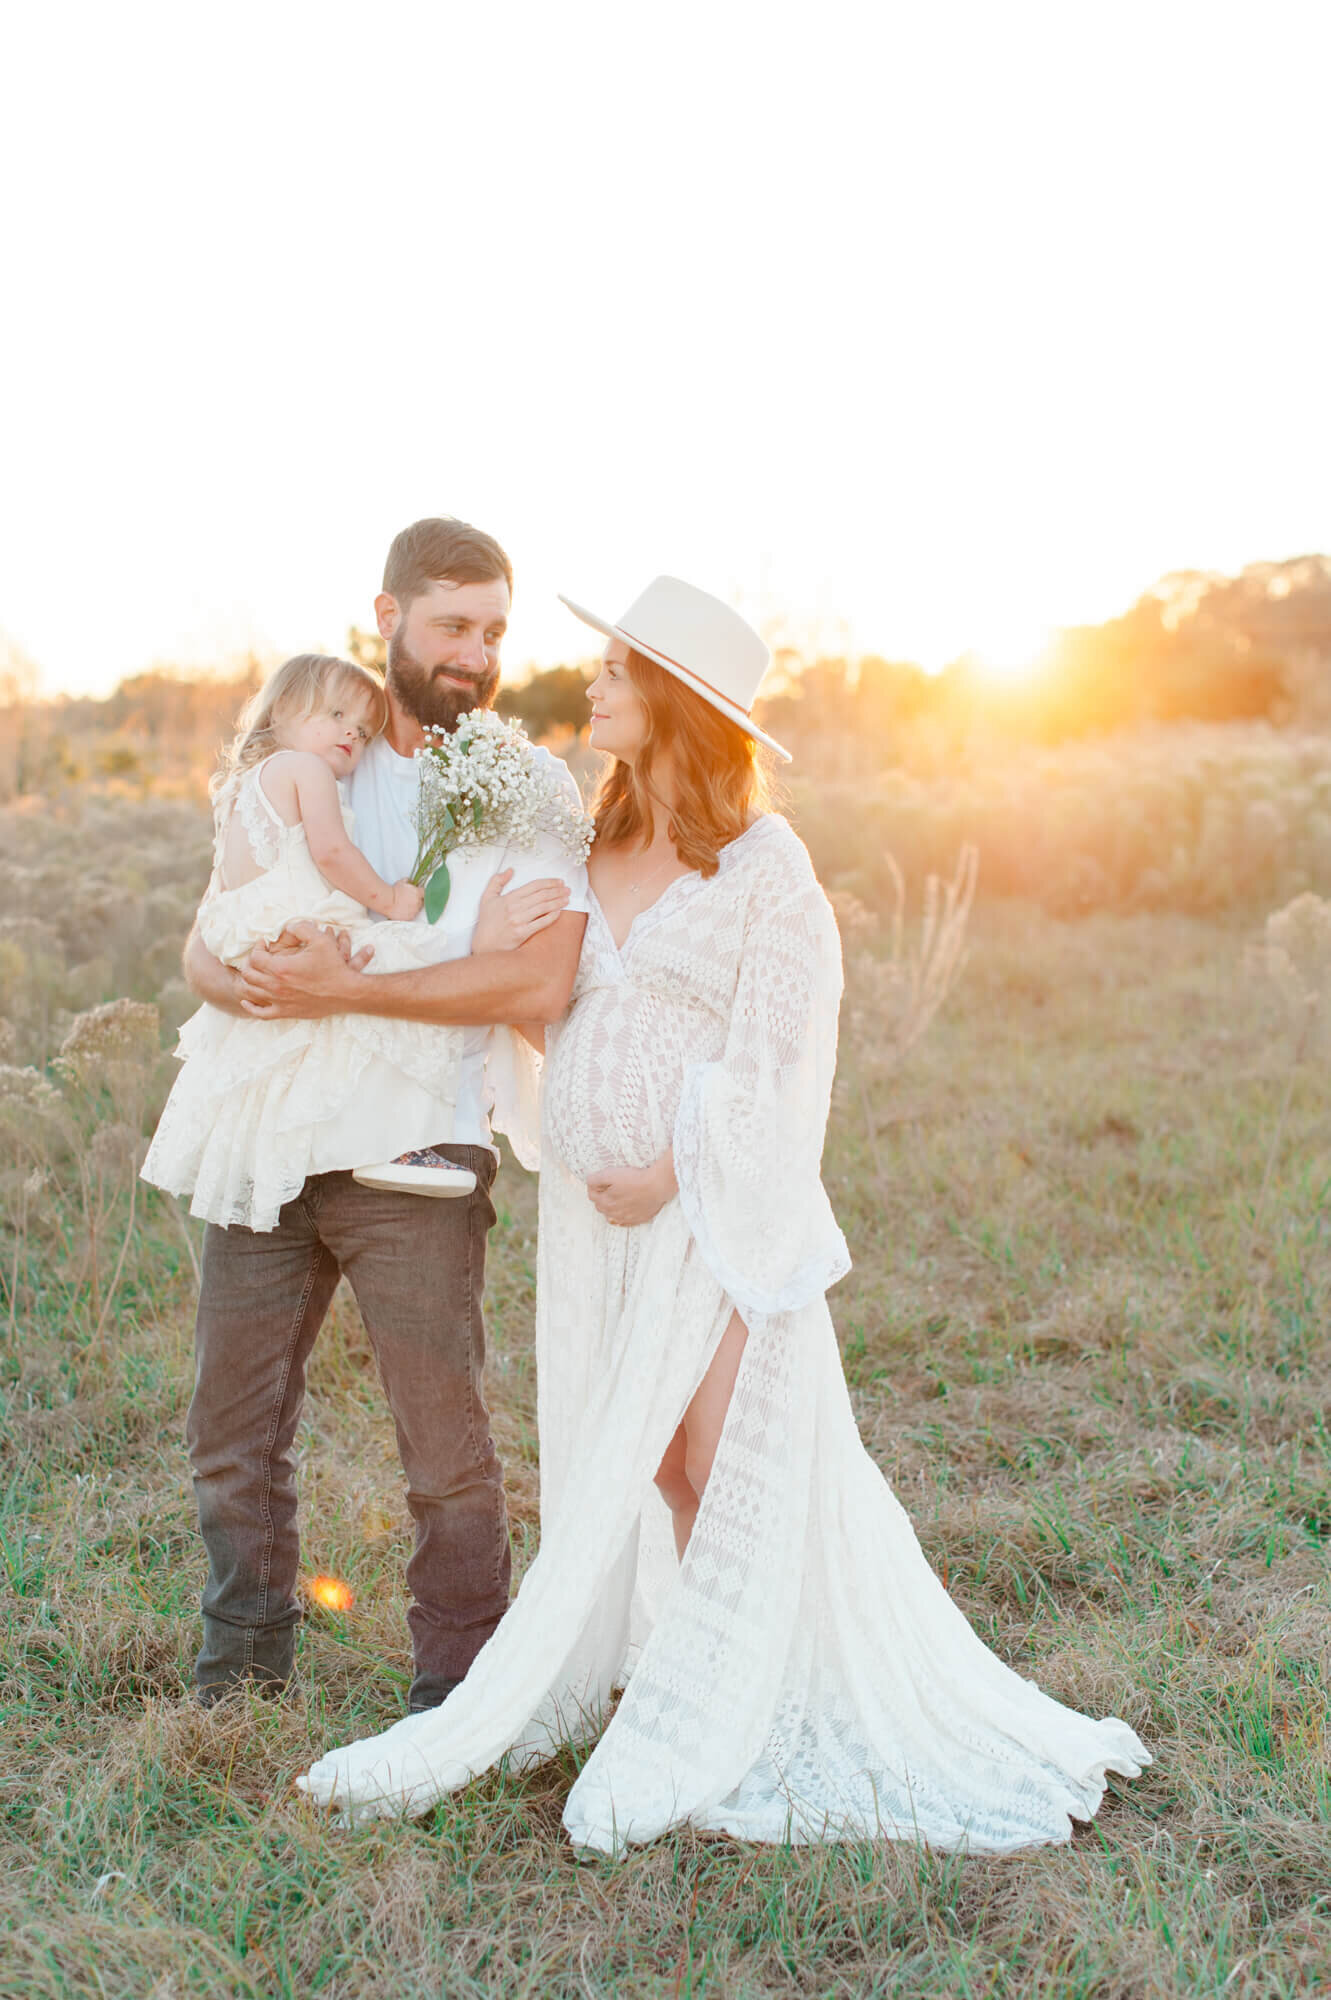 Beautiful sunset image of a expectant mother standing with her husband and older daughter in a tall grass field